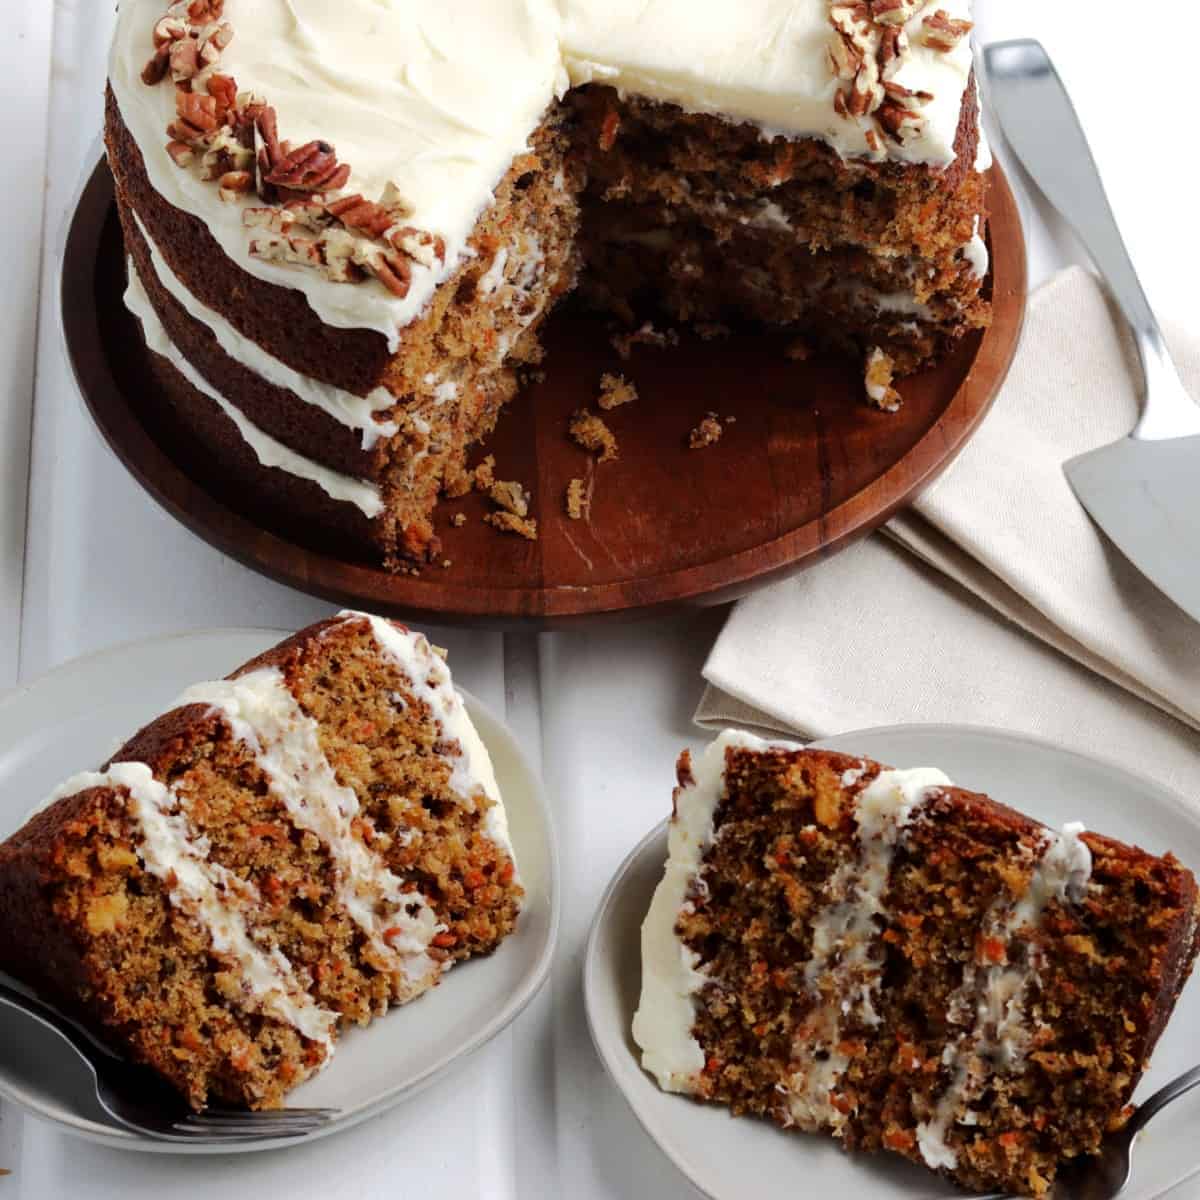 Two dessert plates with carrot cake slices and the three layered cake behind.